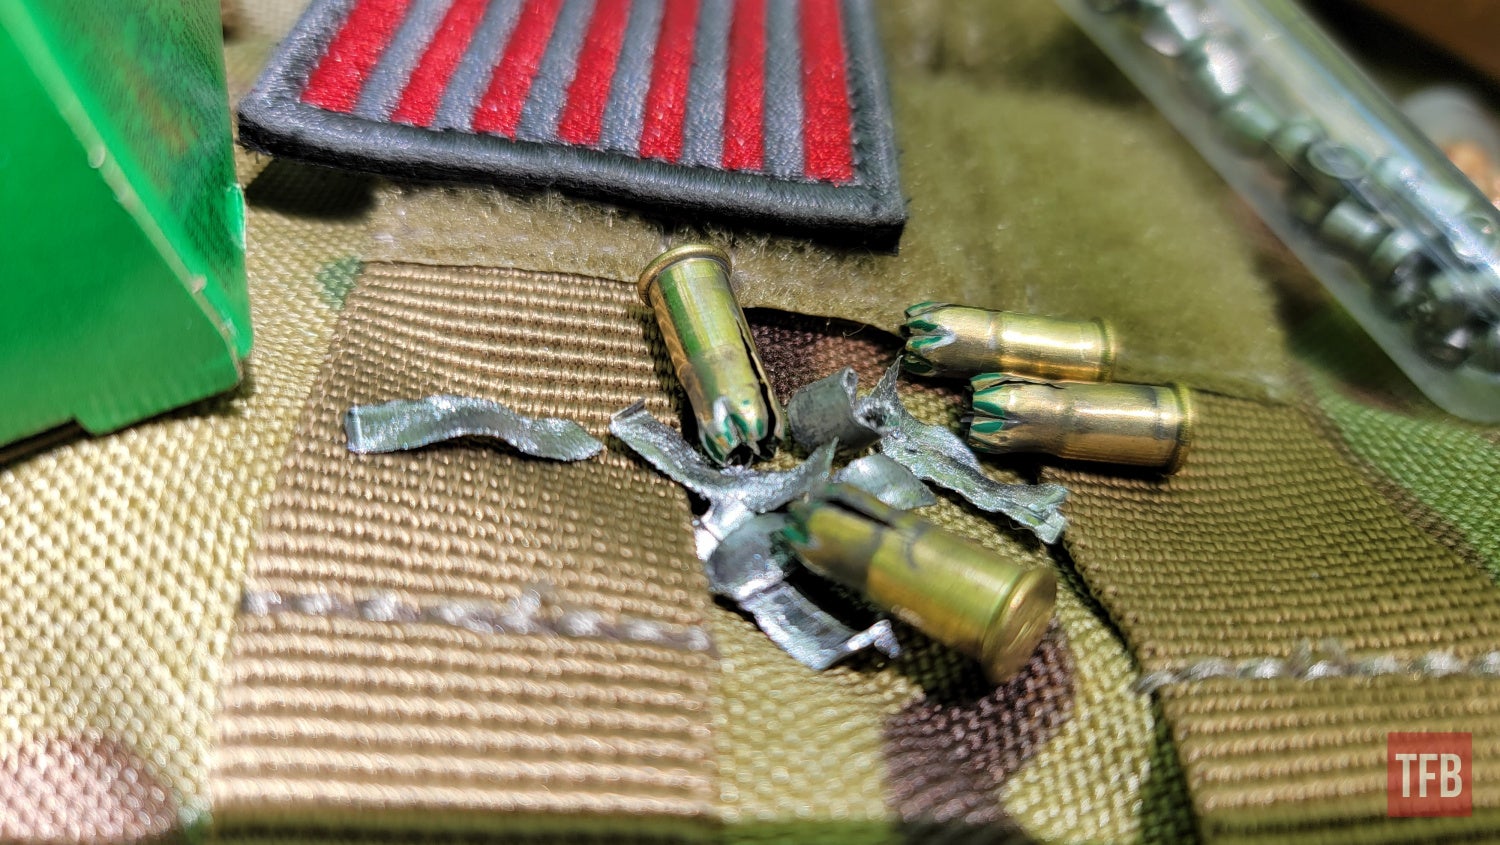 The Rimfire Report: Ammo For The Apocalypse - Nail Blanks and 22 Pellets